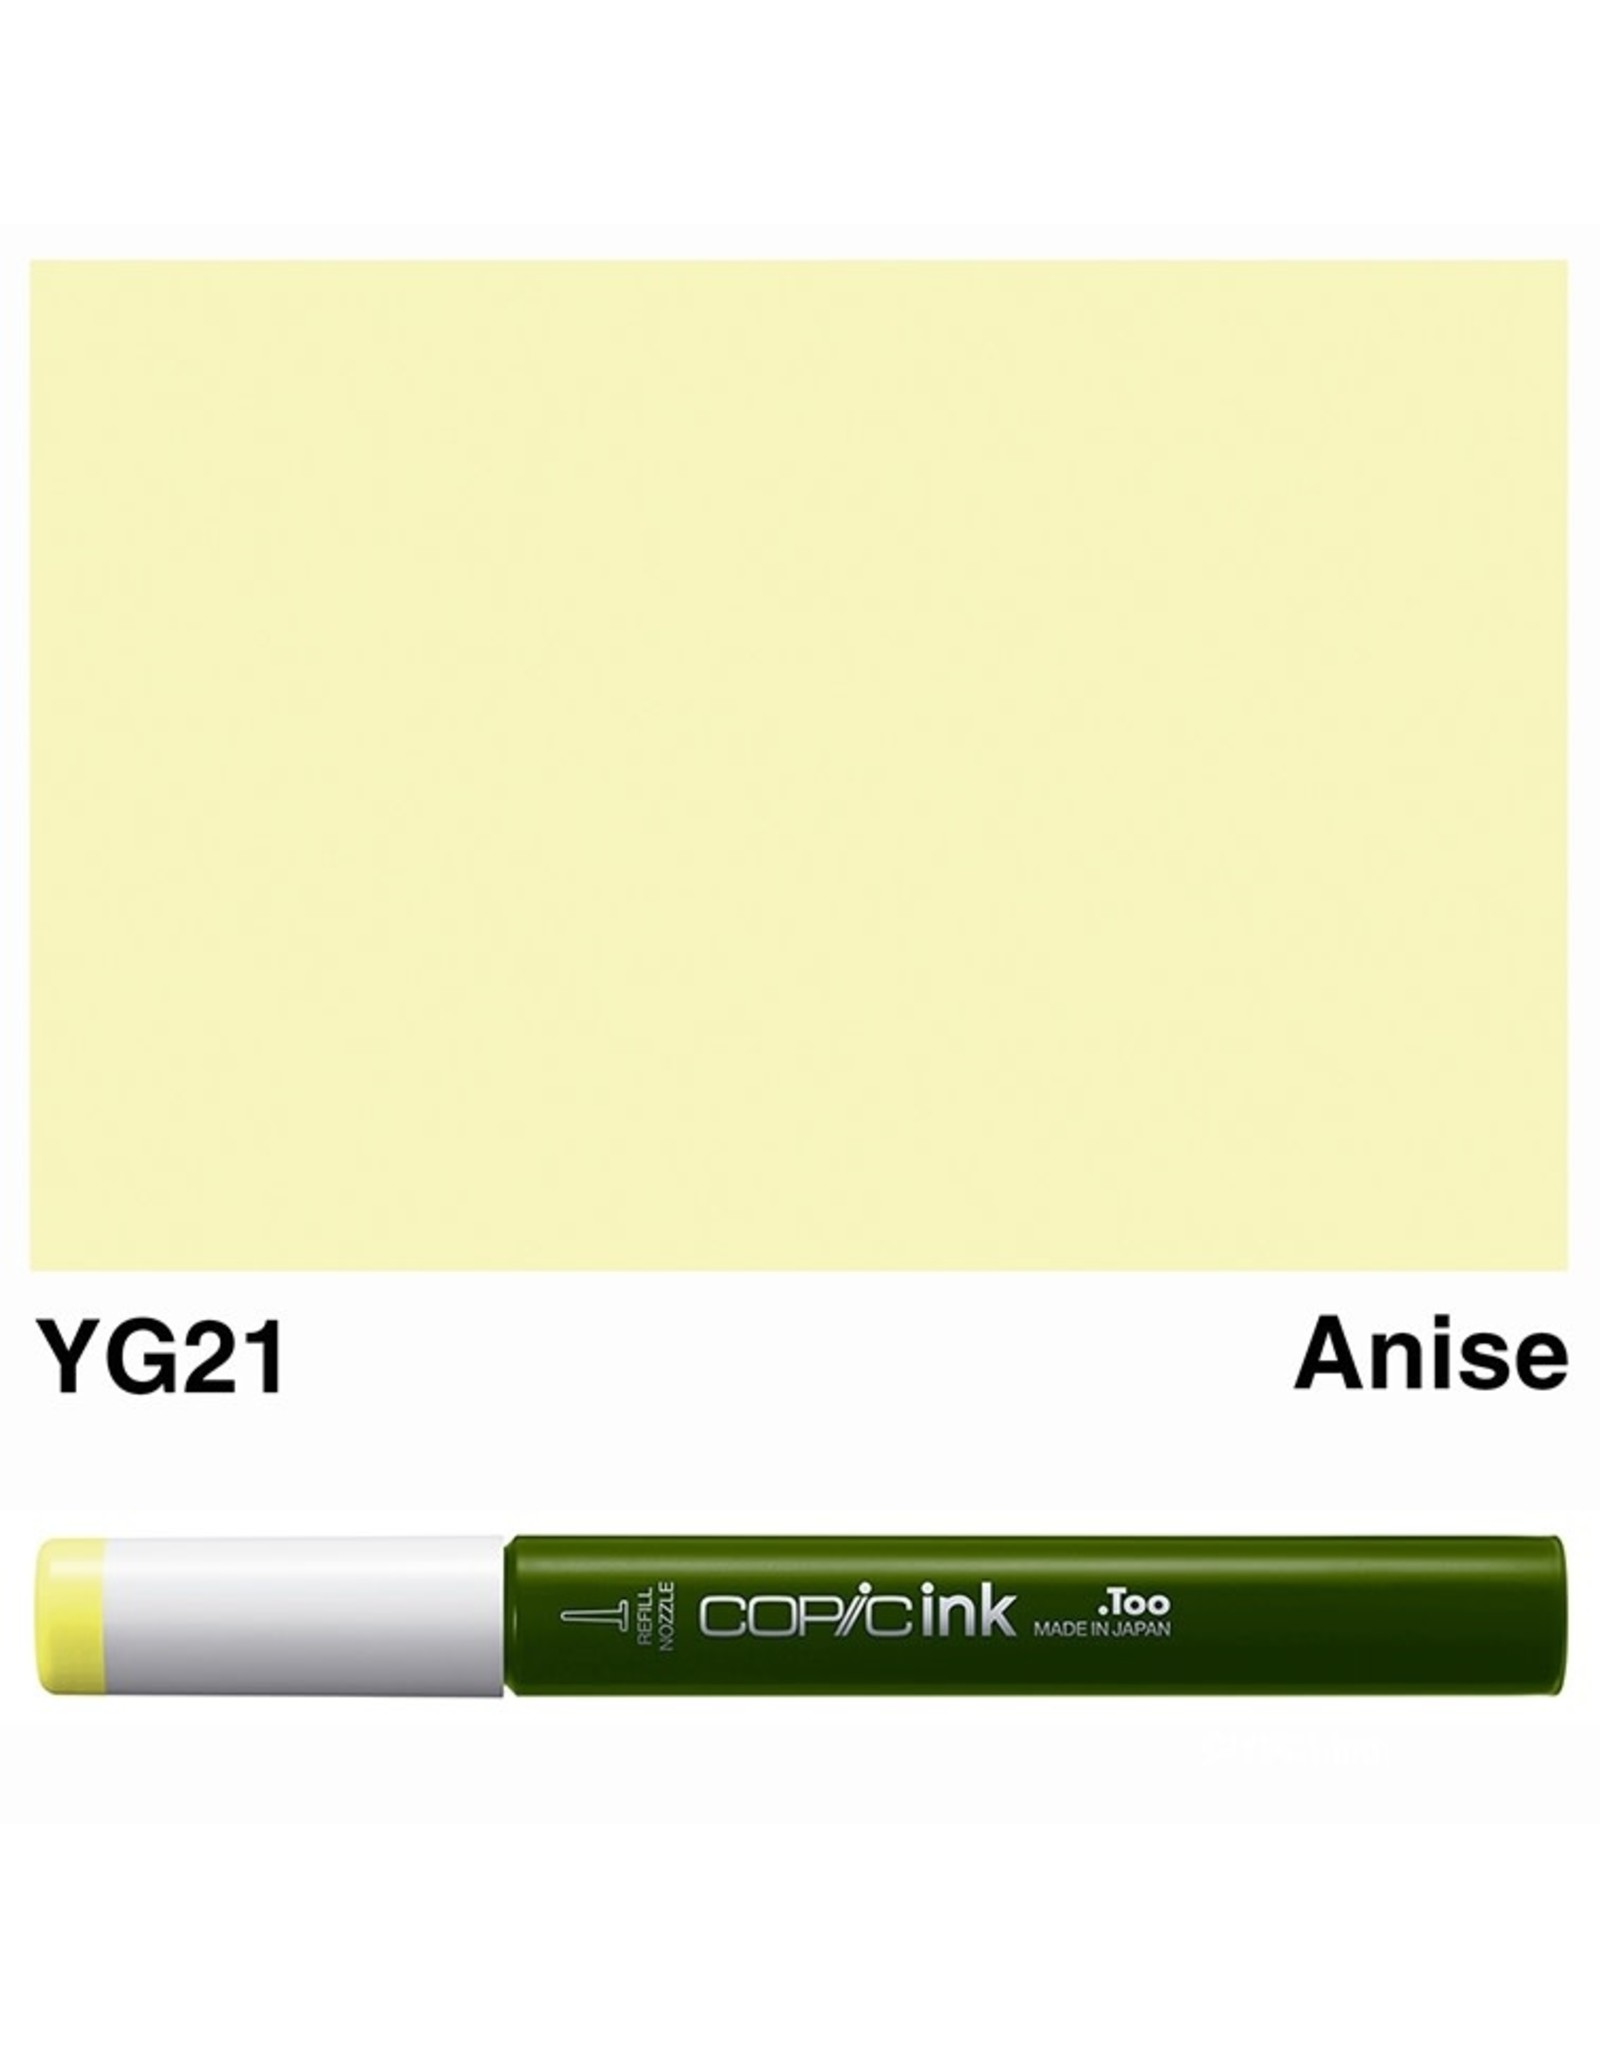 COPIC COPIC YG21 ANISE REFILL